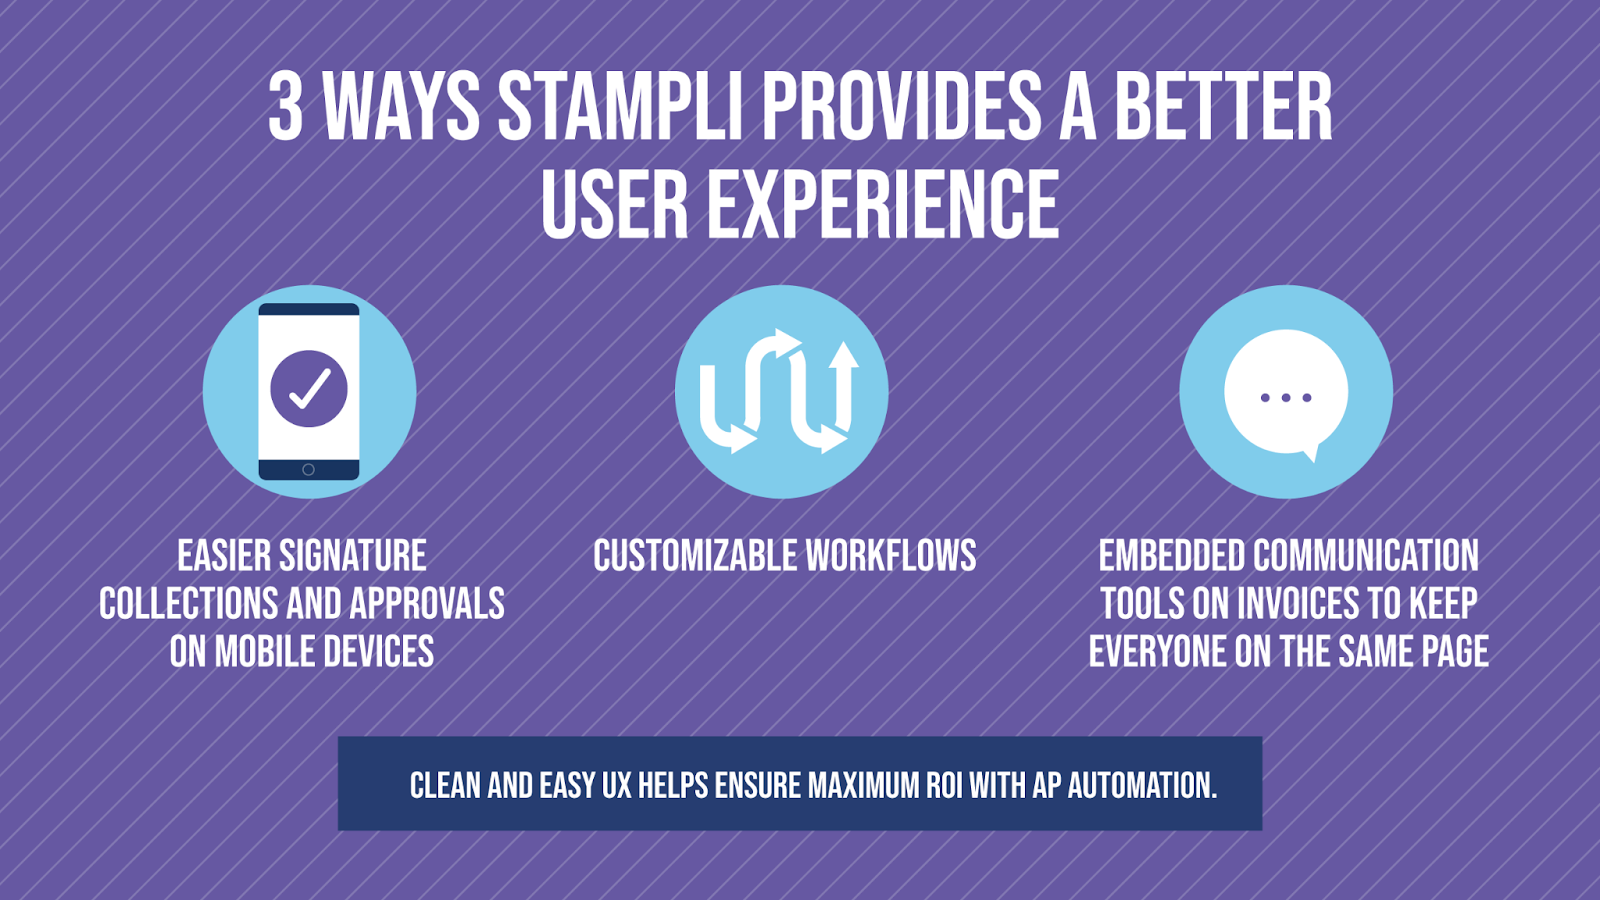 3 ways stampli provides a better user experience